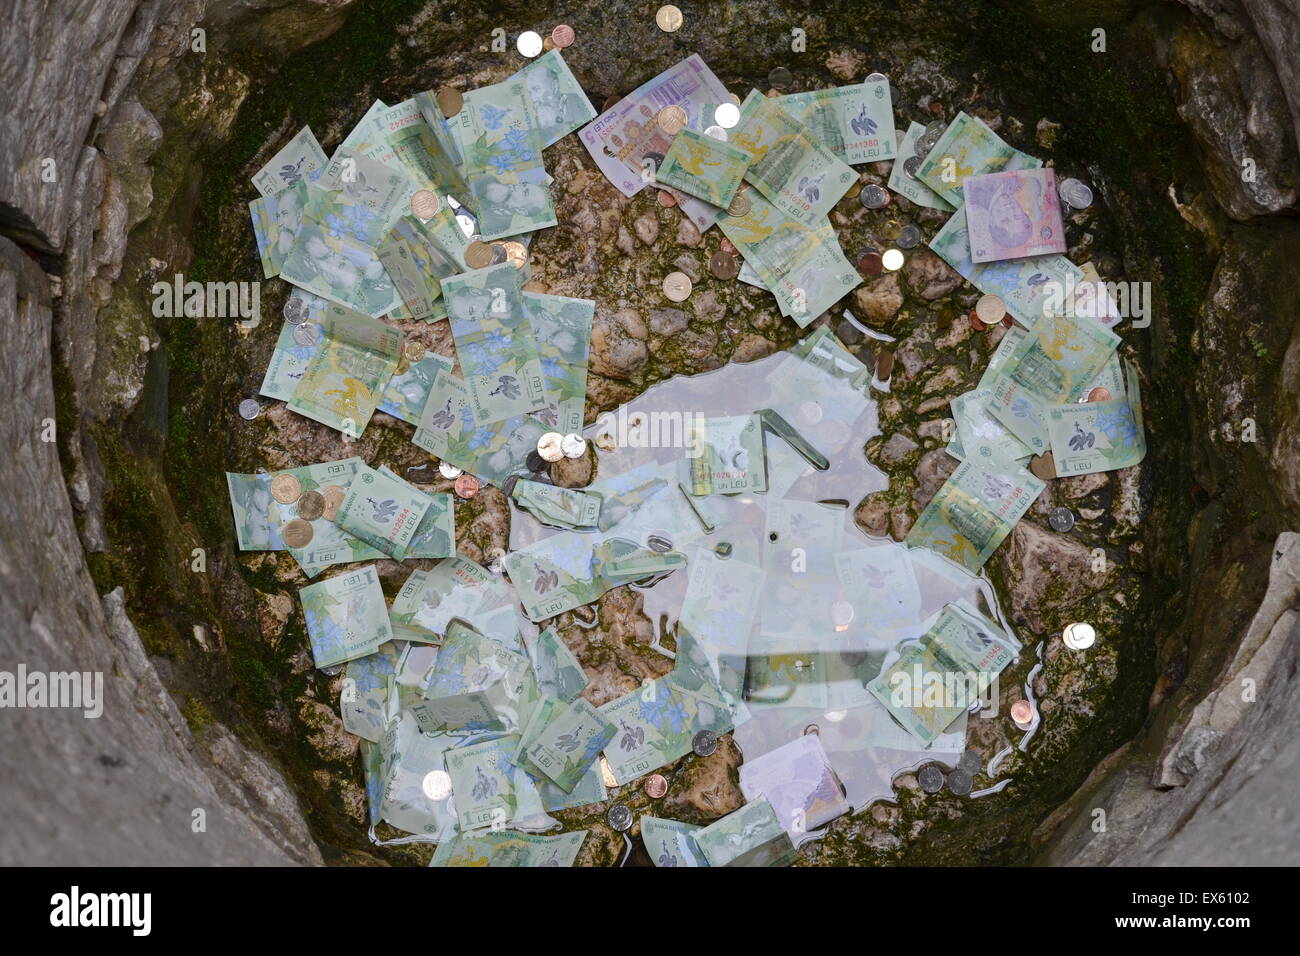 Romanian lei cash banknotes and coins in a fortune well Stock Photo